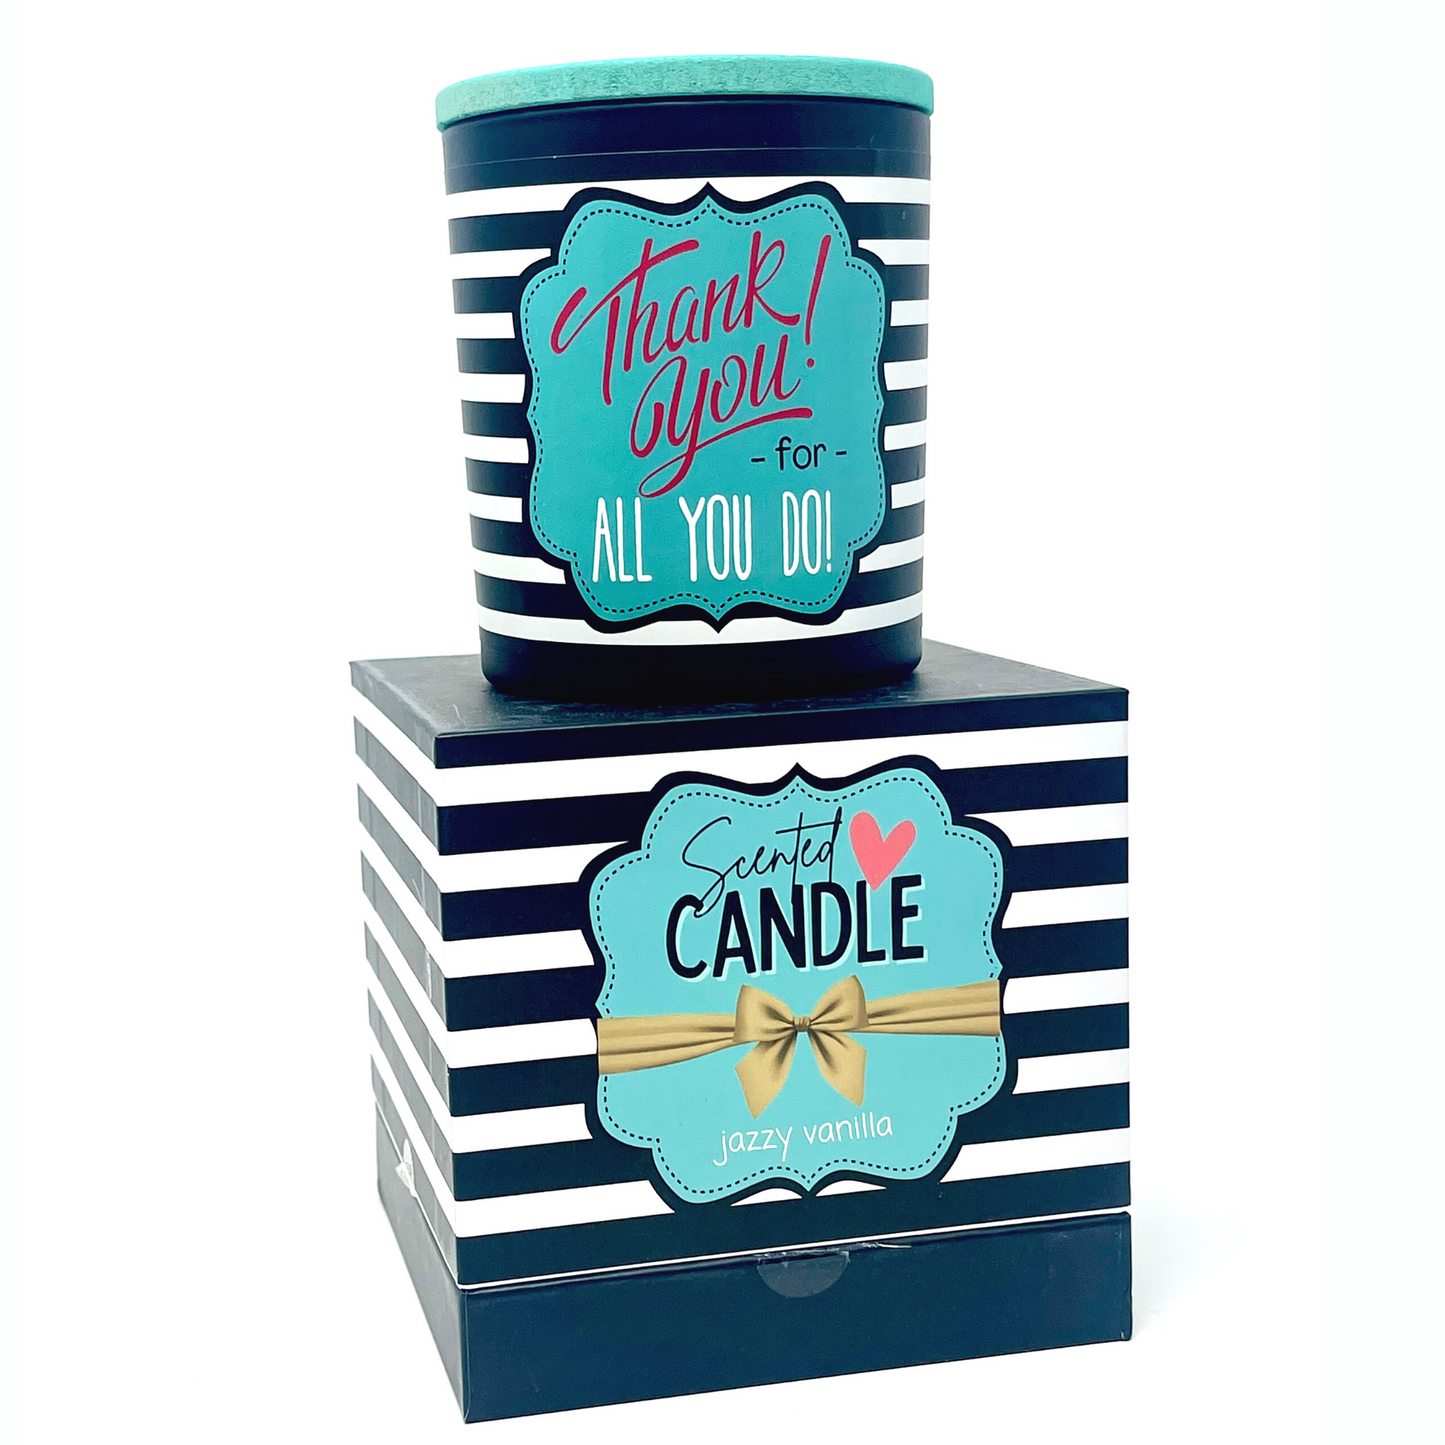 Thank You 8 oz Jasmine and Vanilla Scented Candle